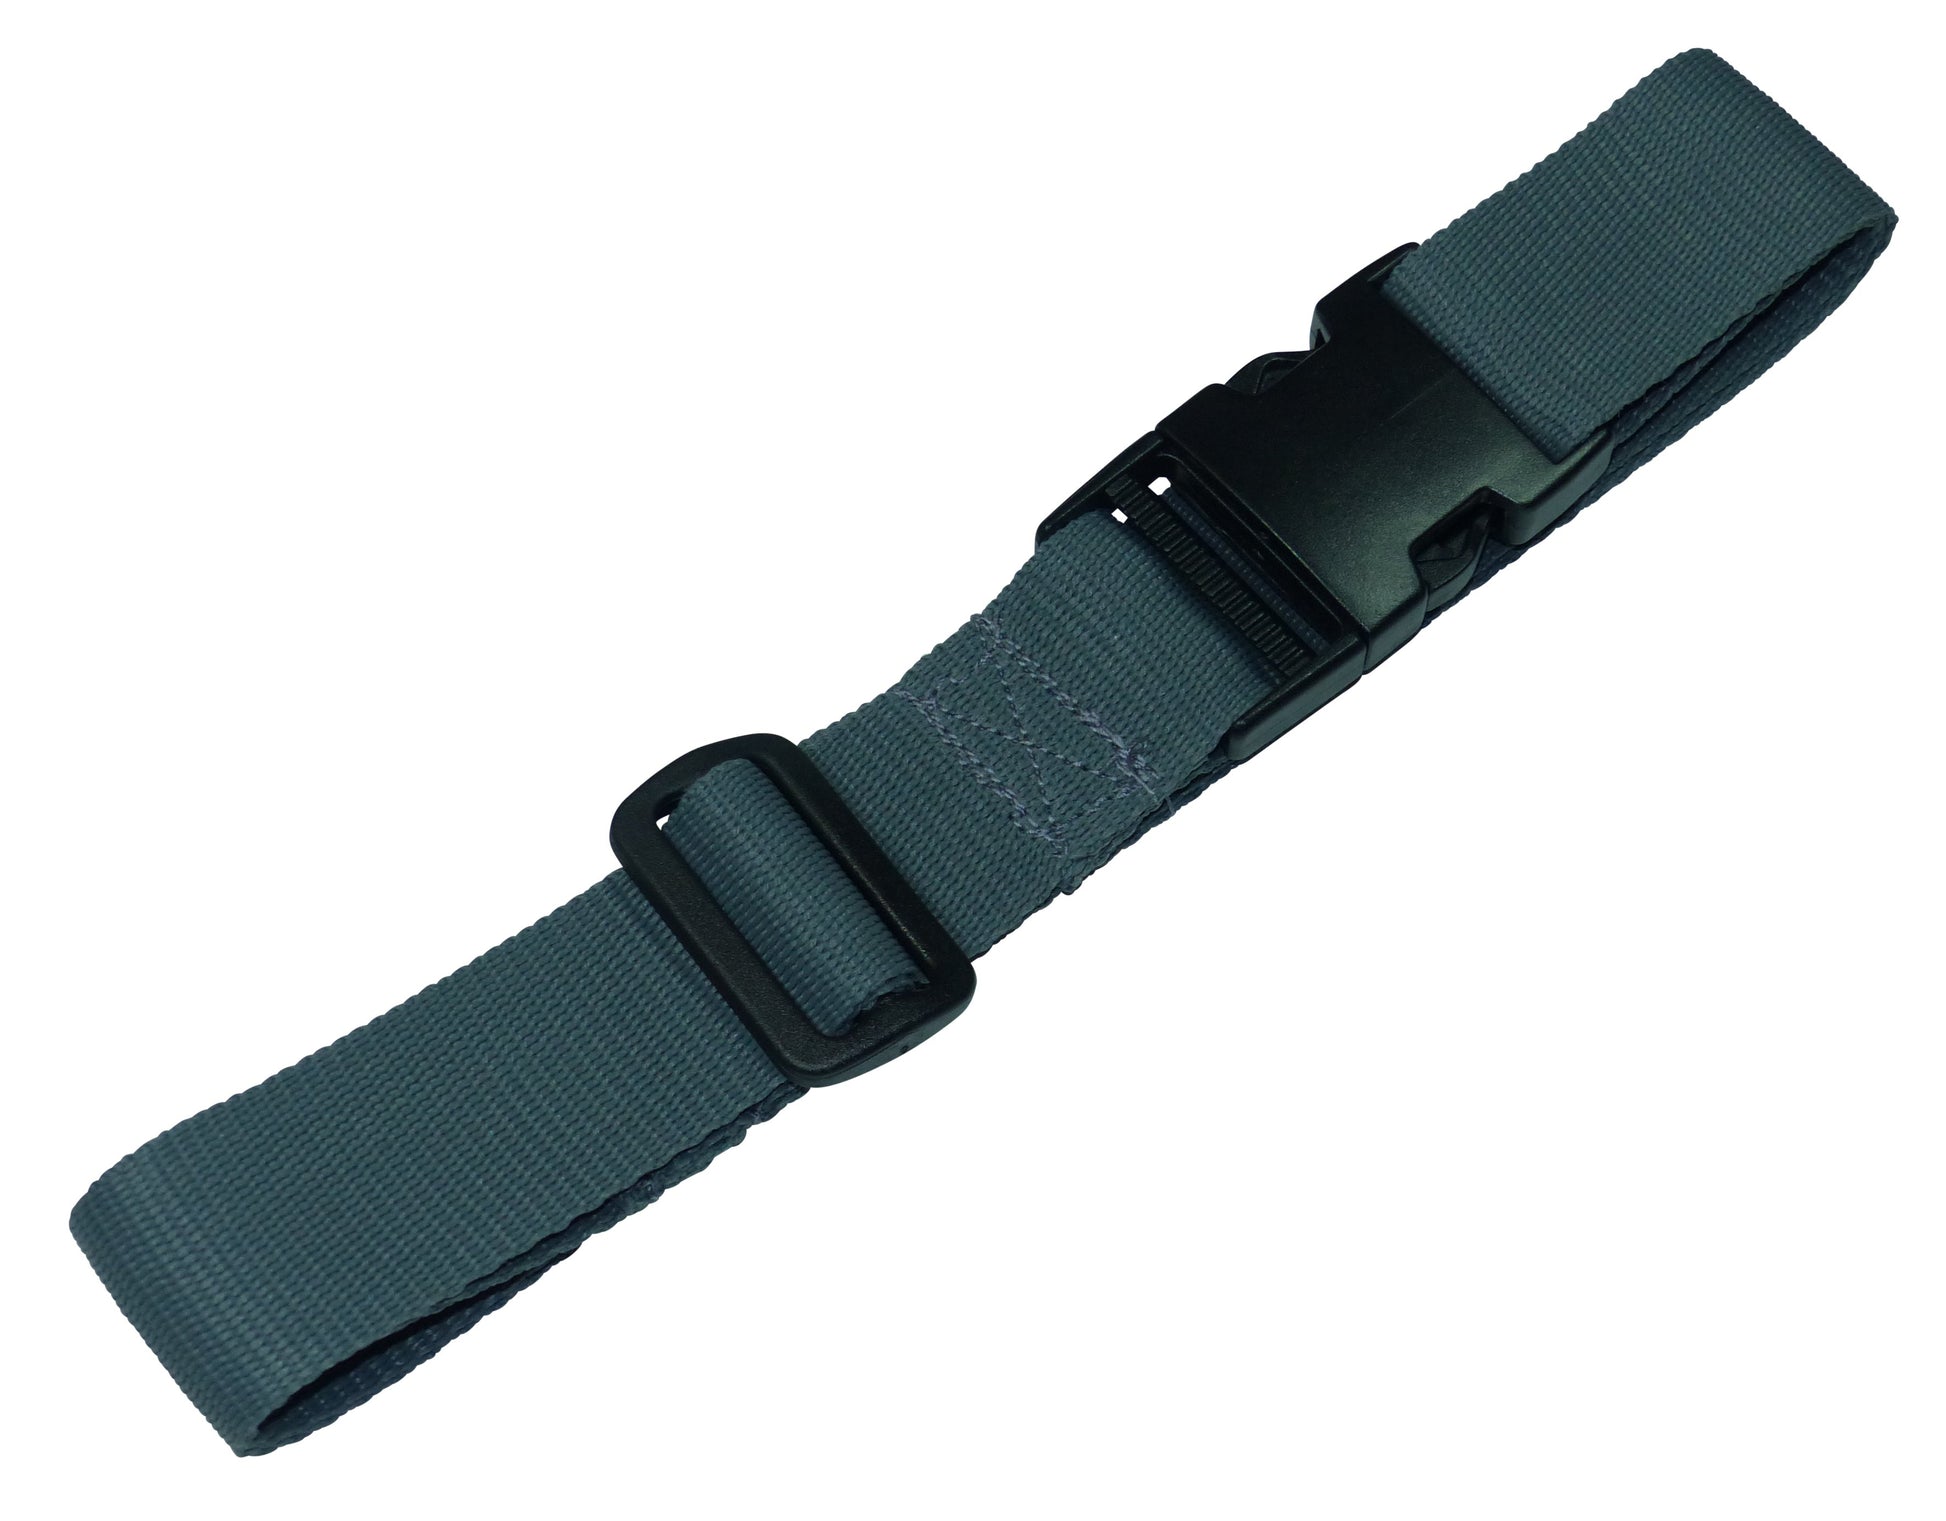 Benristraps 38mm Webbing Strap with Quick Release & Length-Adjusting Buckles in grey